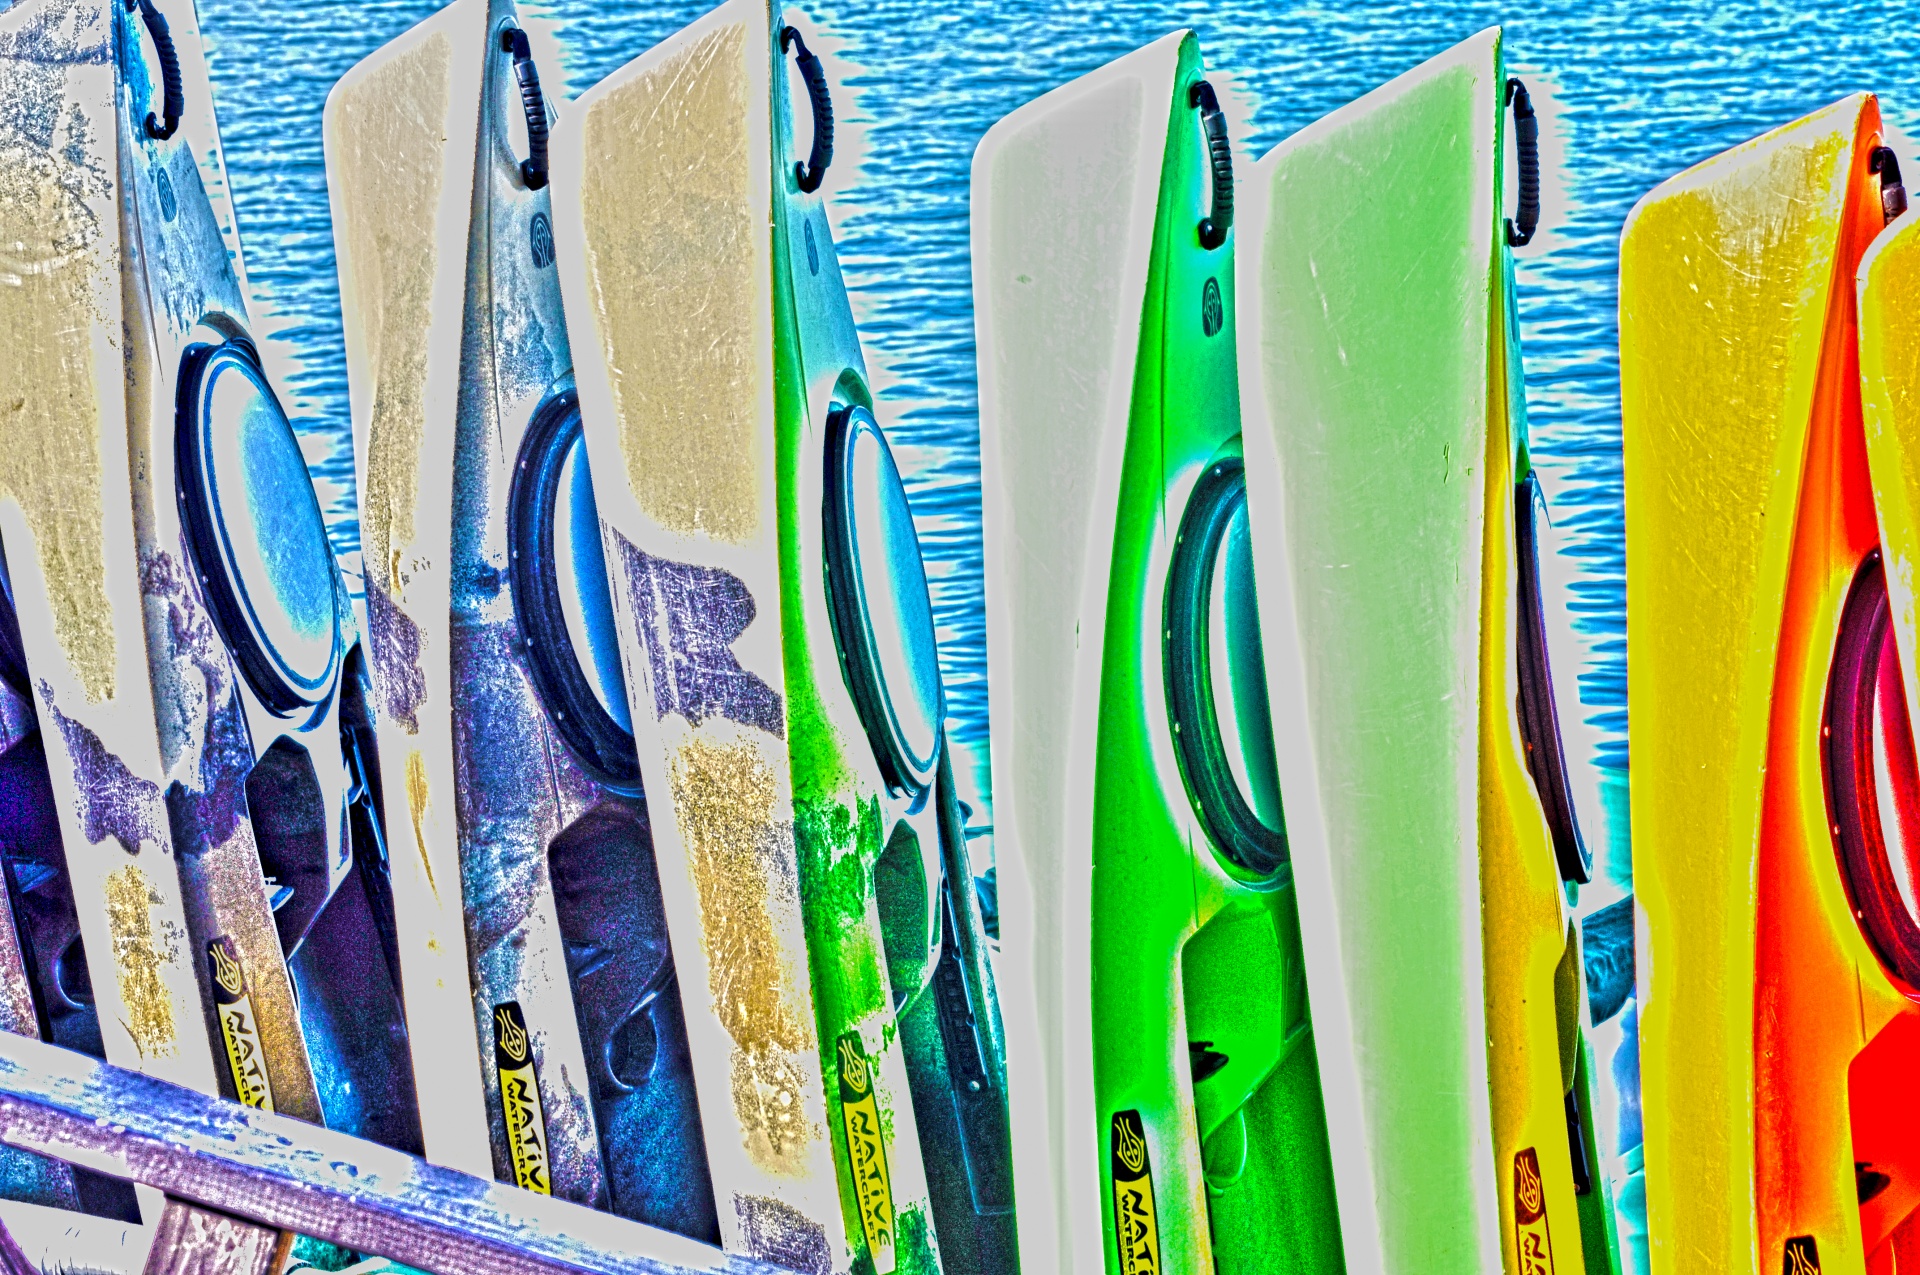 artistic effect added to photo pf a row of upright kayaks awaiting rental